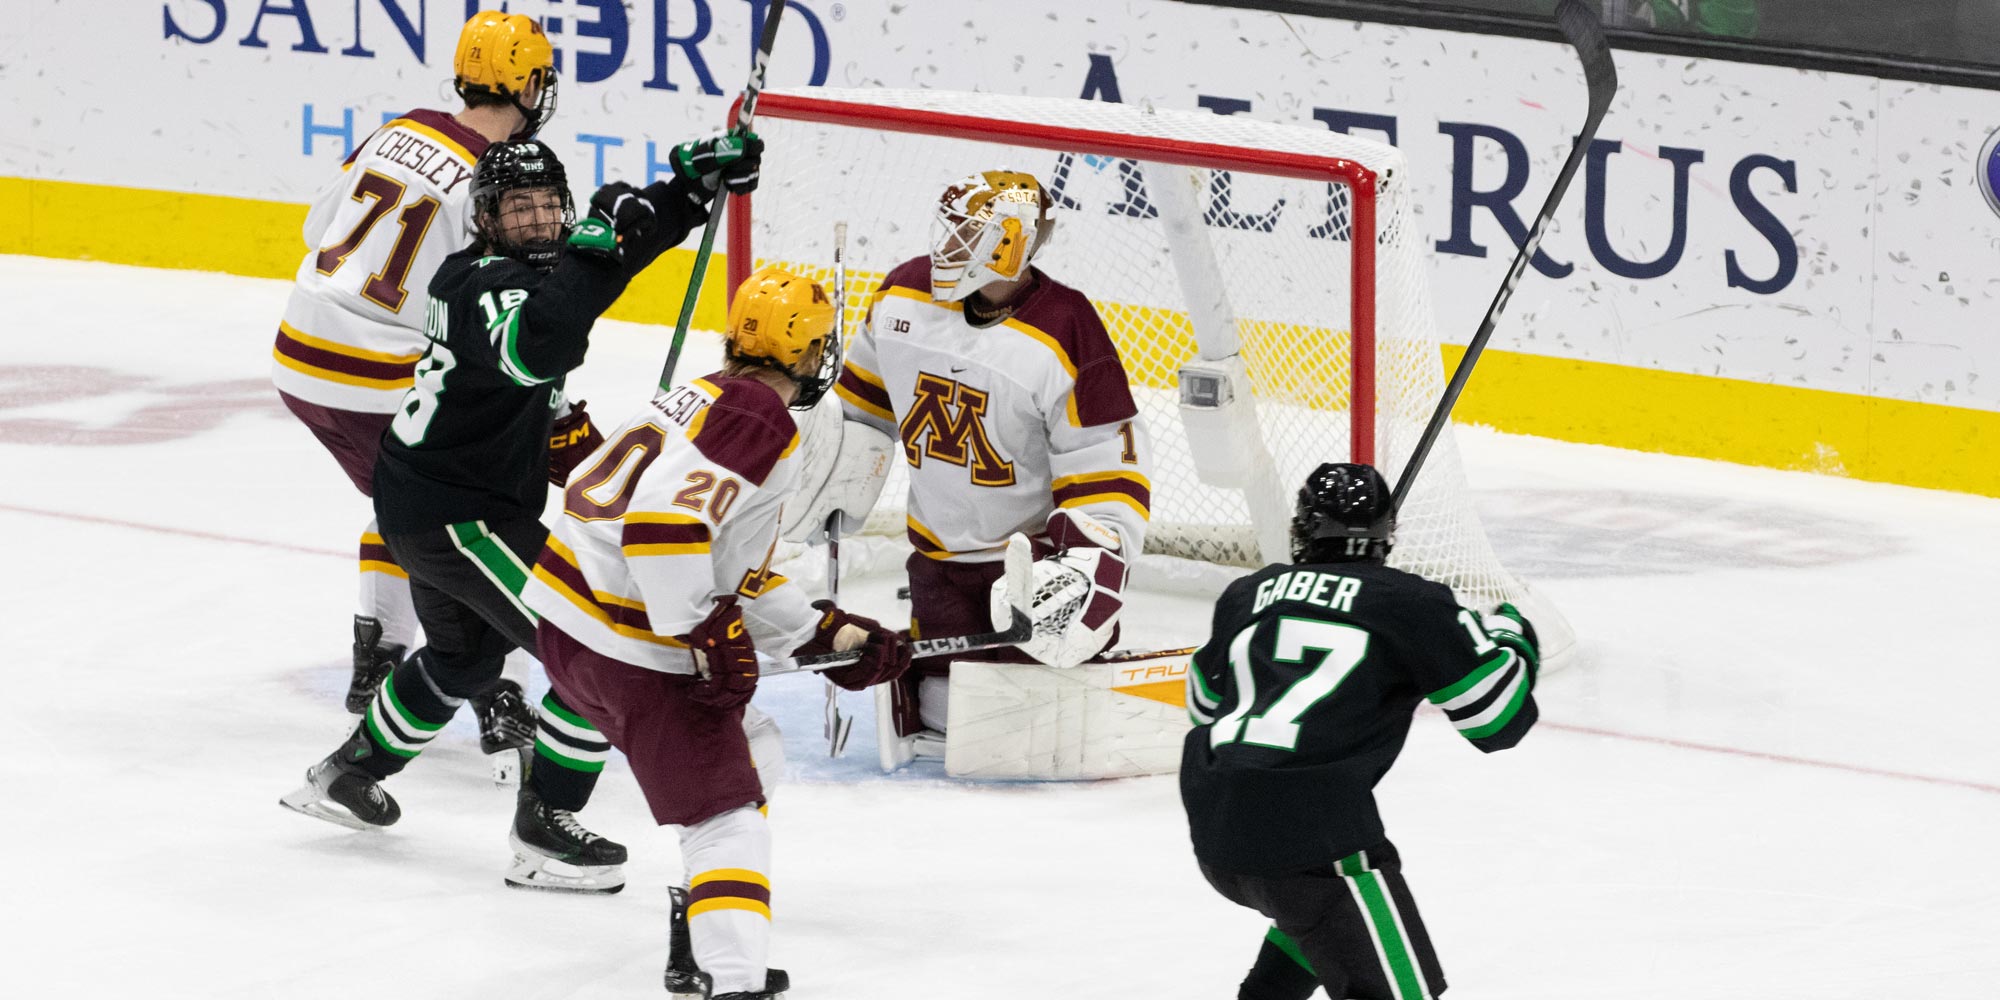 UND's Jayden Perron with a nice deflection to get the 1st goal of the game.